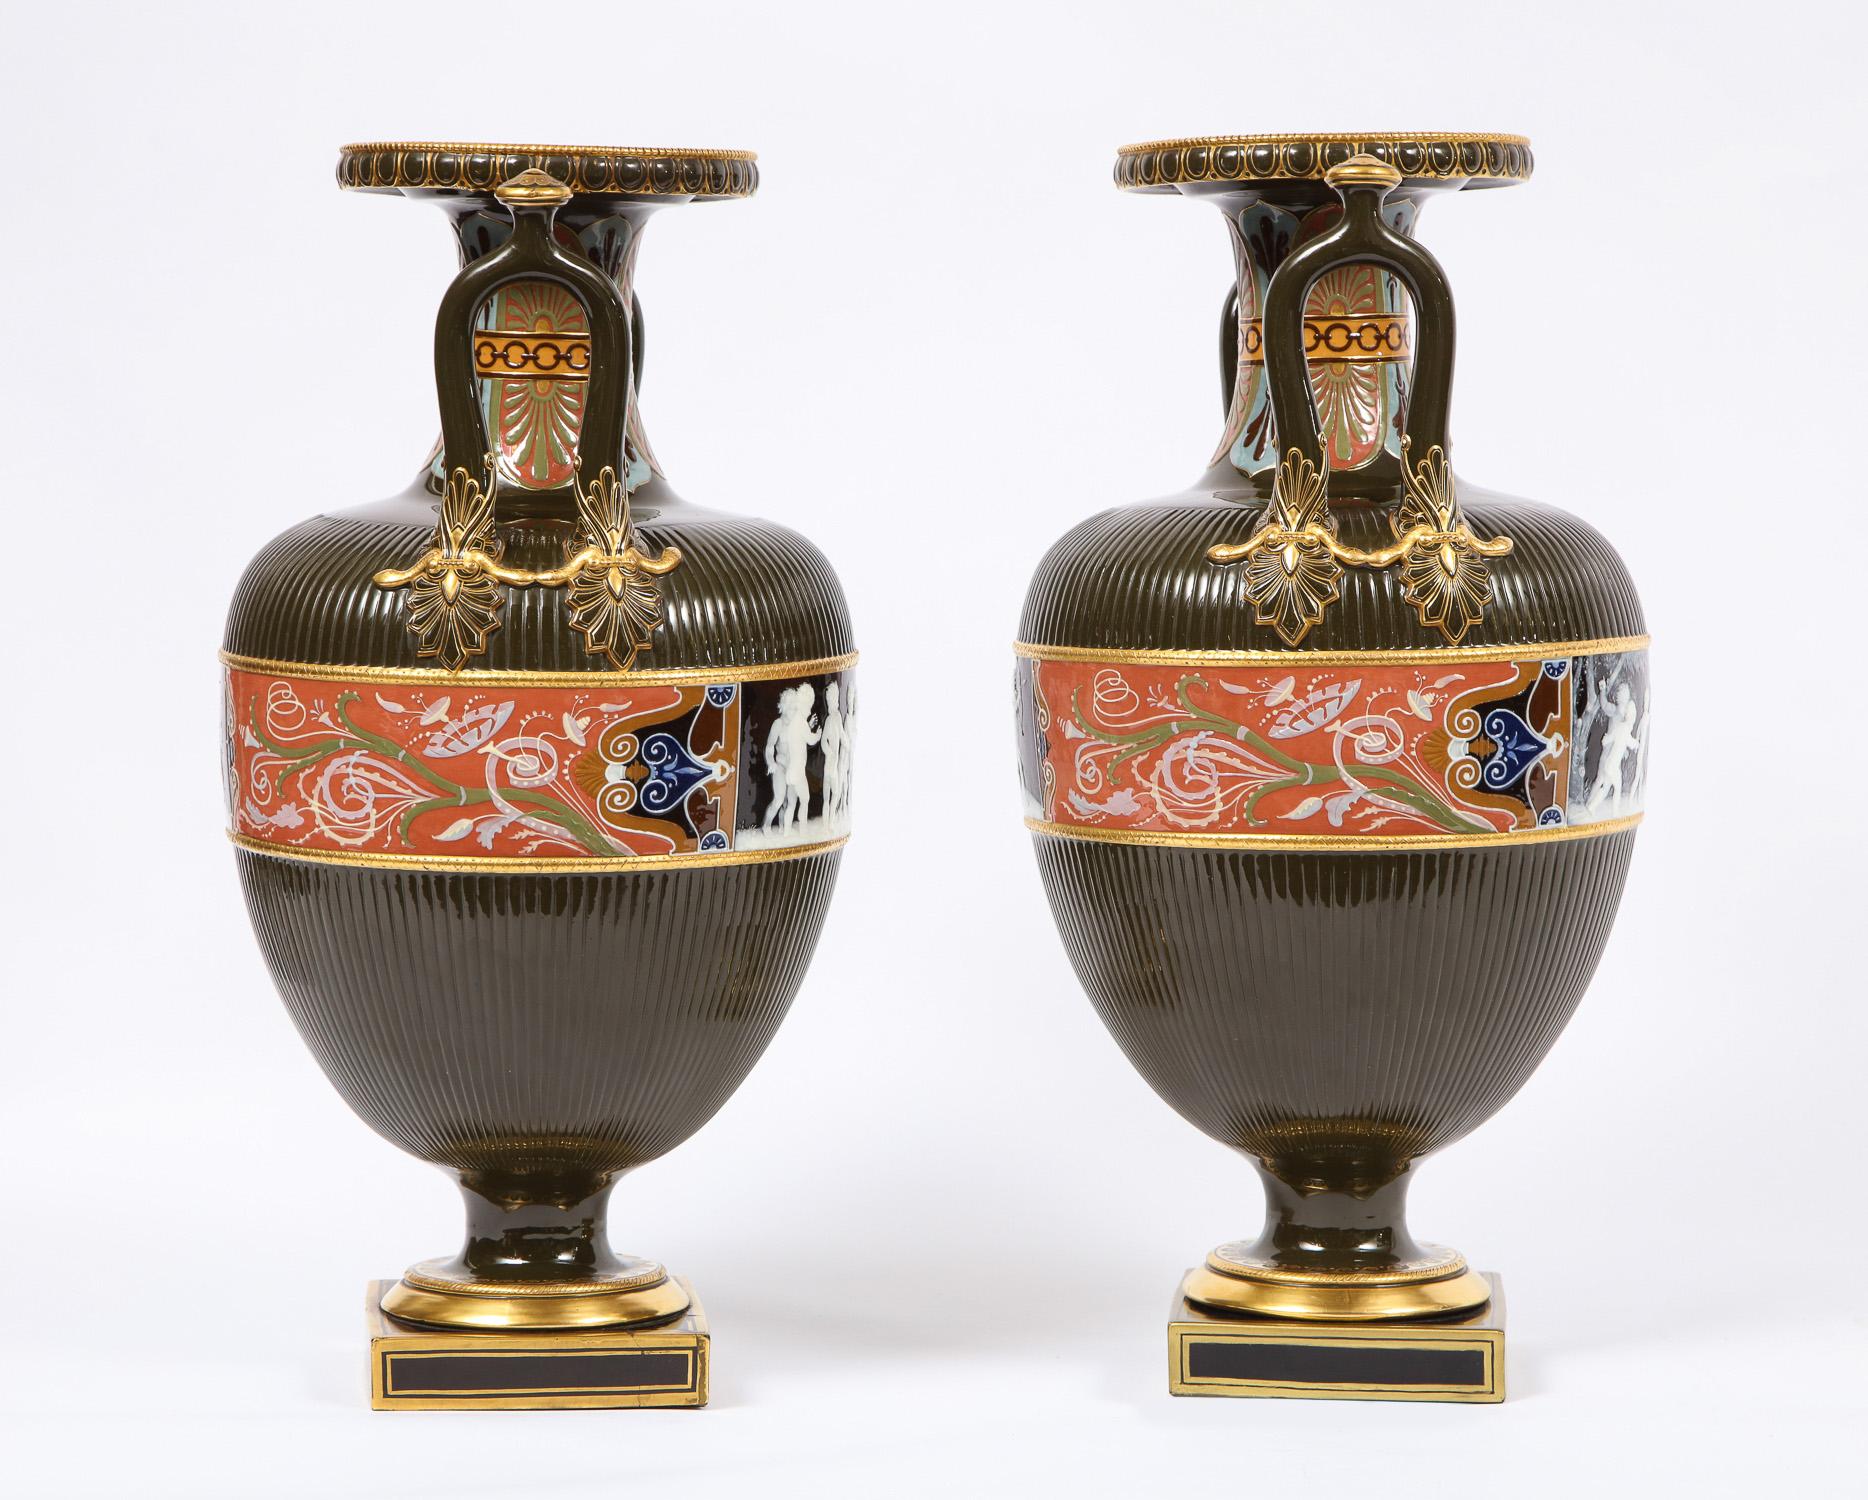 Pair of Mintons Pate Sur Pate Vases with Multi-Panel Neoclassical Subjects 11